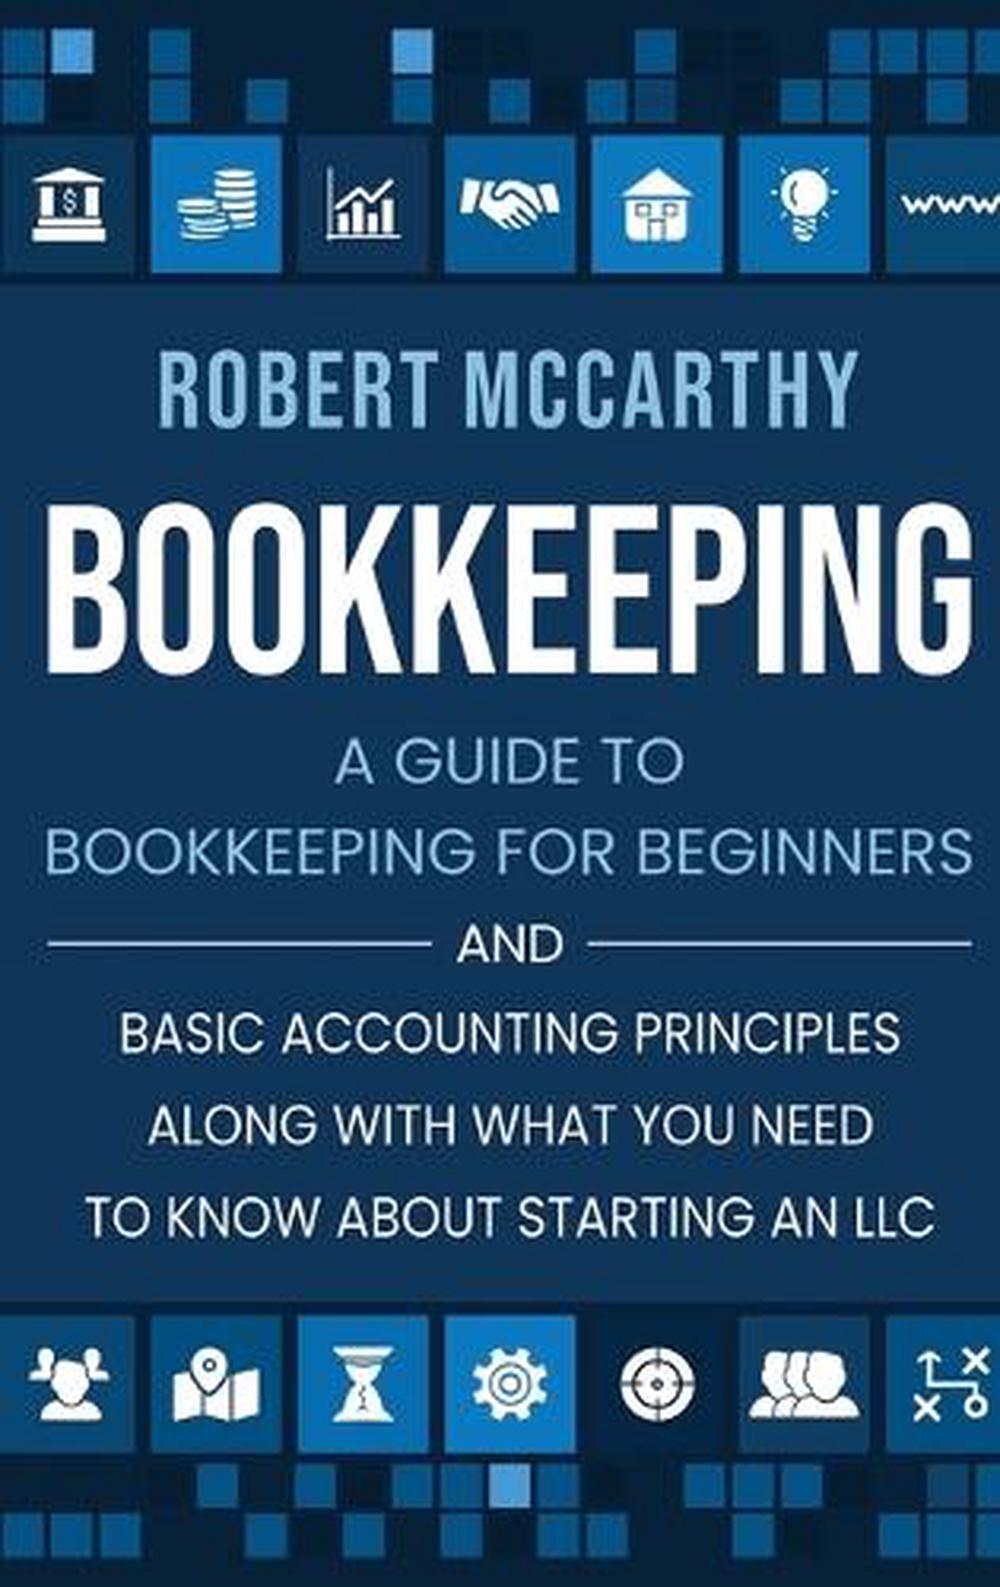 bookkeeping and accounting are same